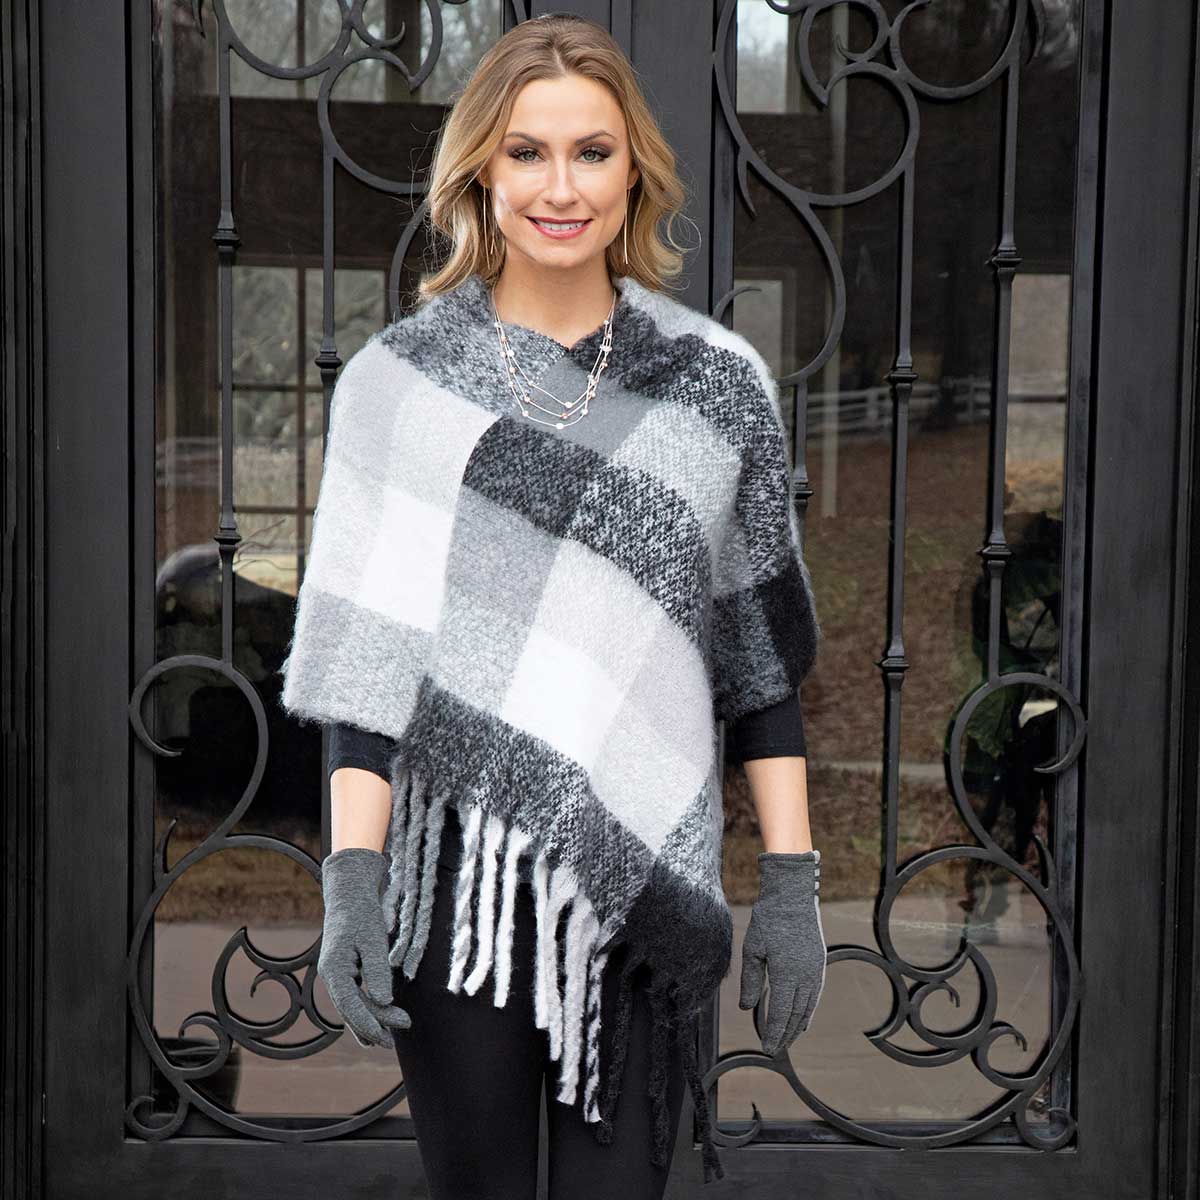 Black and Grey Plaid Knit Poncho with Fringe 34"x36"